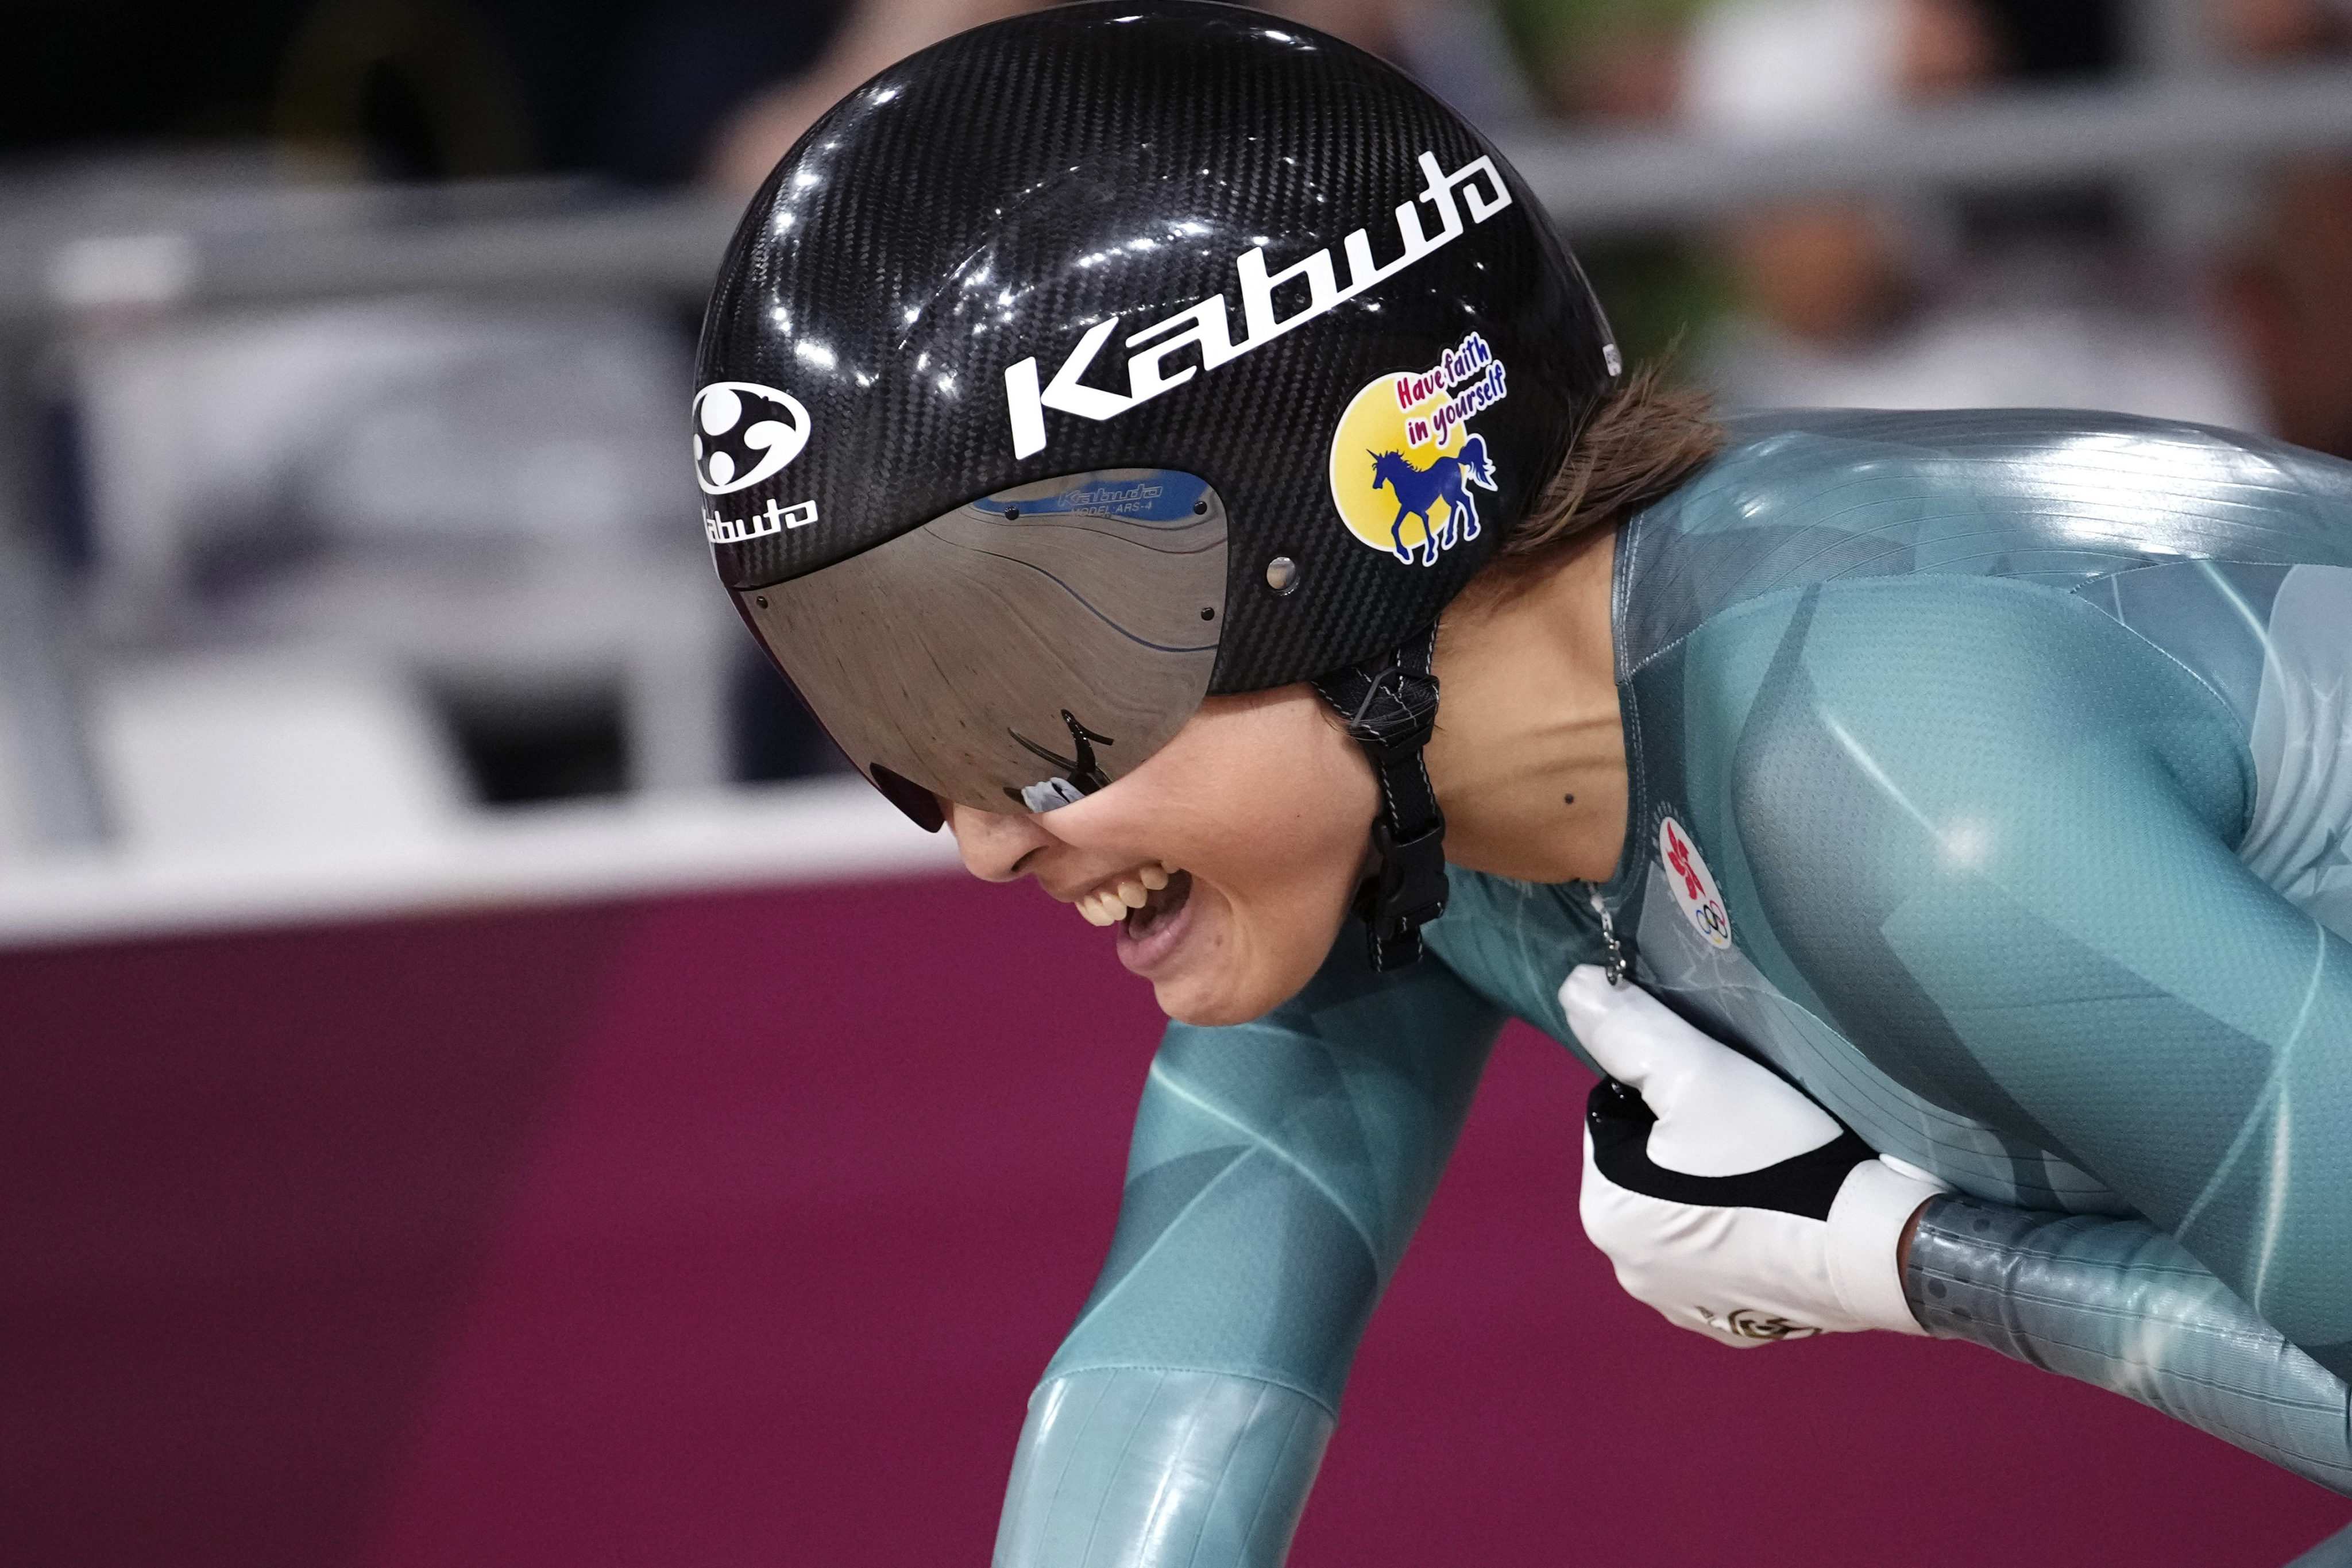 Wai Sze Lee of Team Hong Kong reacts to winning the bronze medal during the track cycling women’s sprint race at the 2020 Summer Olympics, Sunday, Aug. 8, 2021, in Izu, Japan. (AP Photo/Christophe Ena)